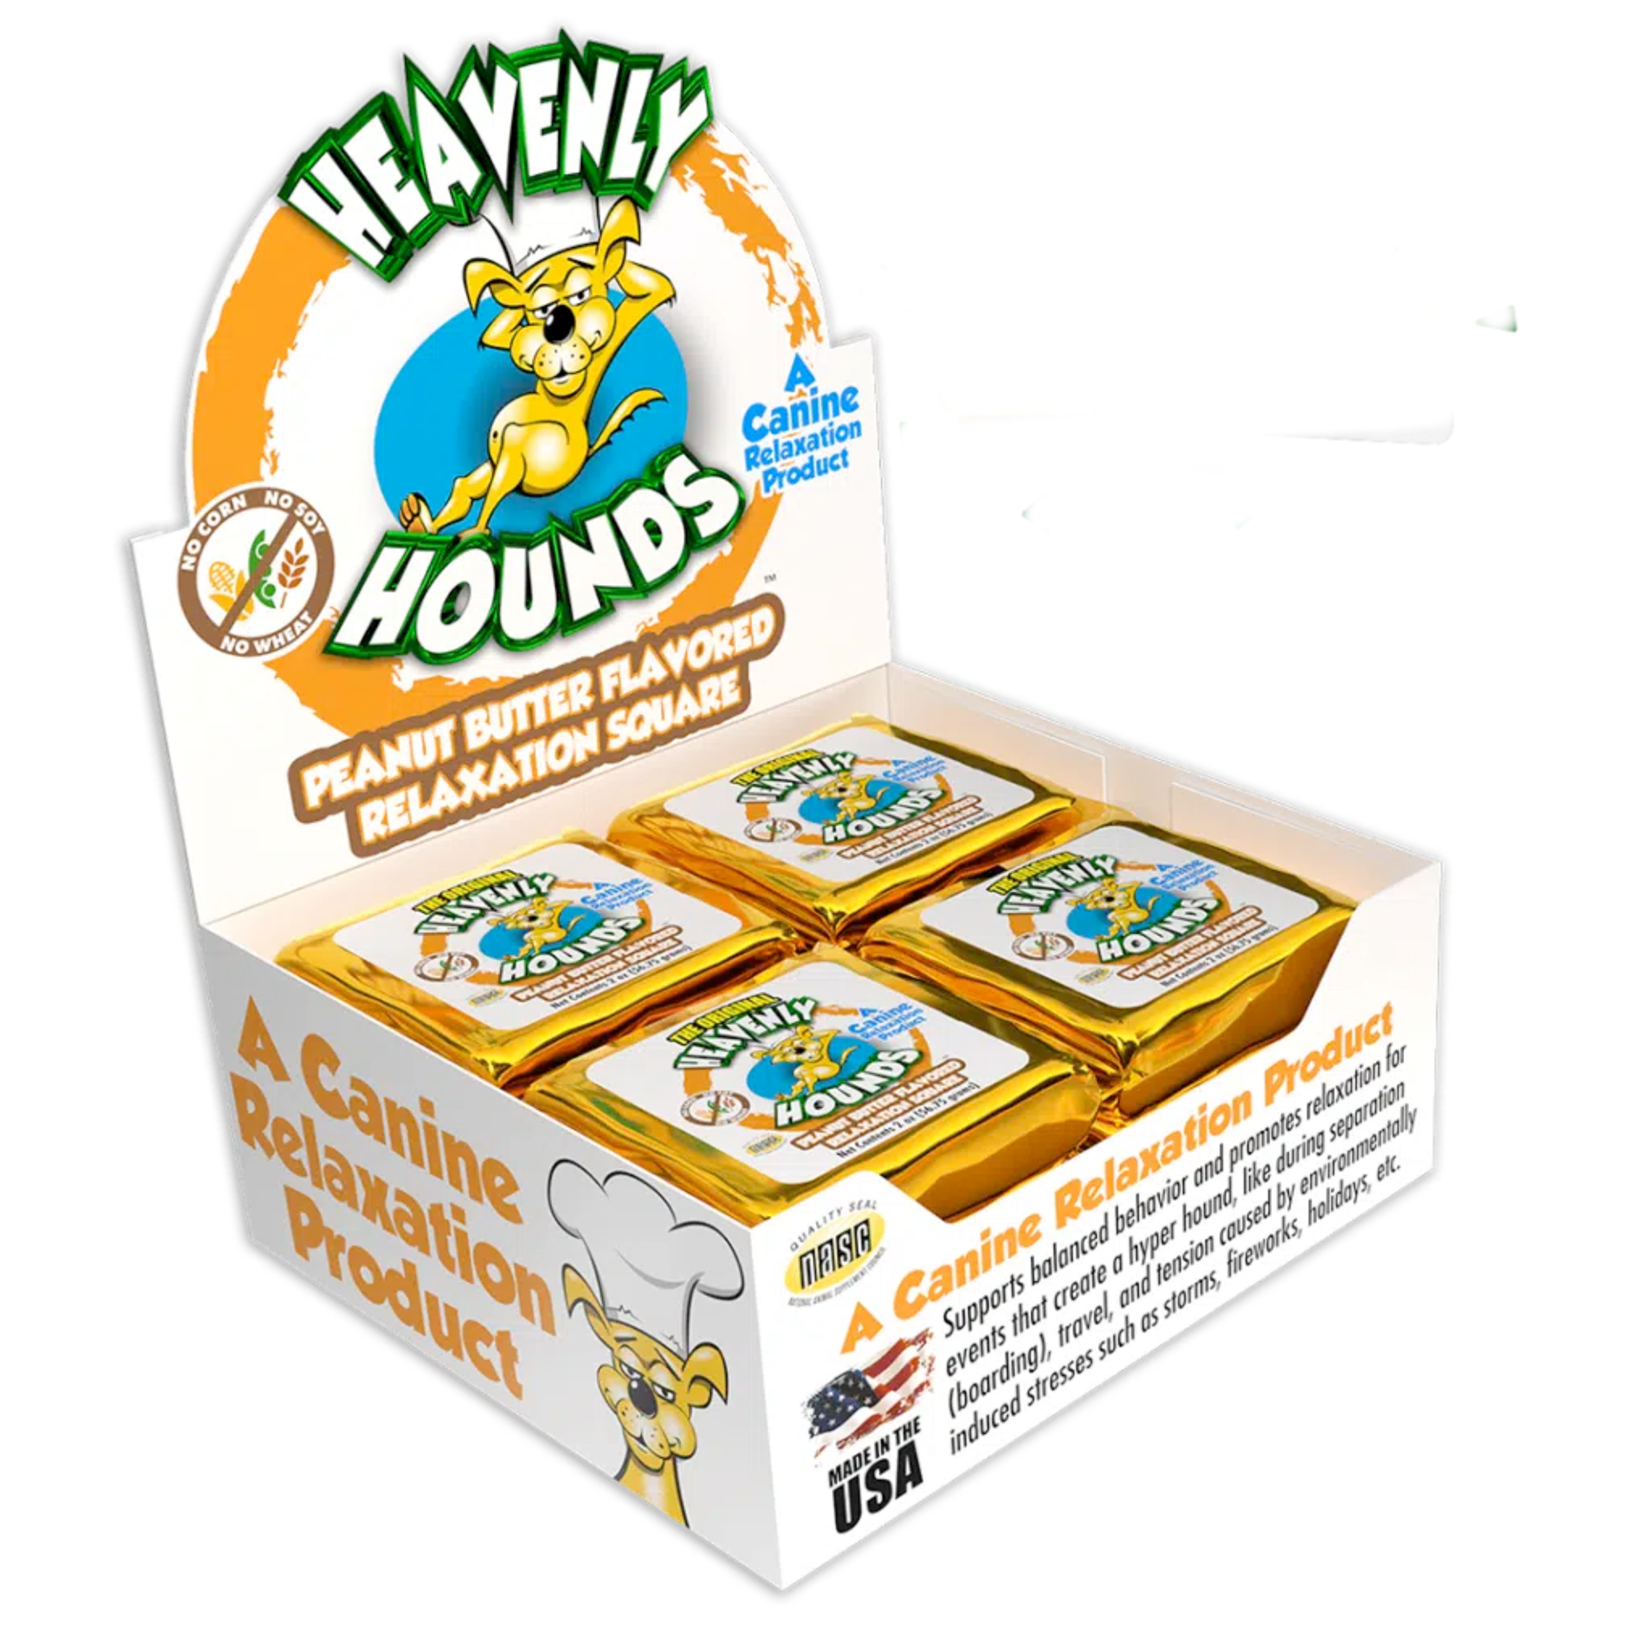 Heavenly Hounds Peanut Butter Relaxation Squares 2oz with Valerian